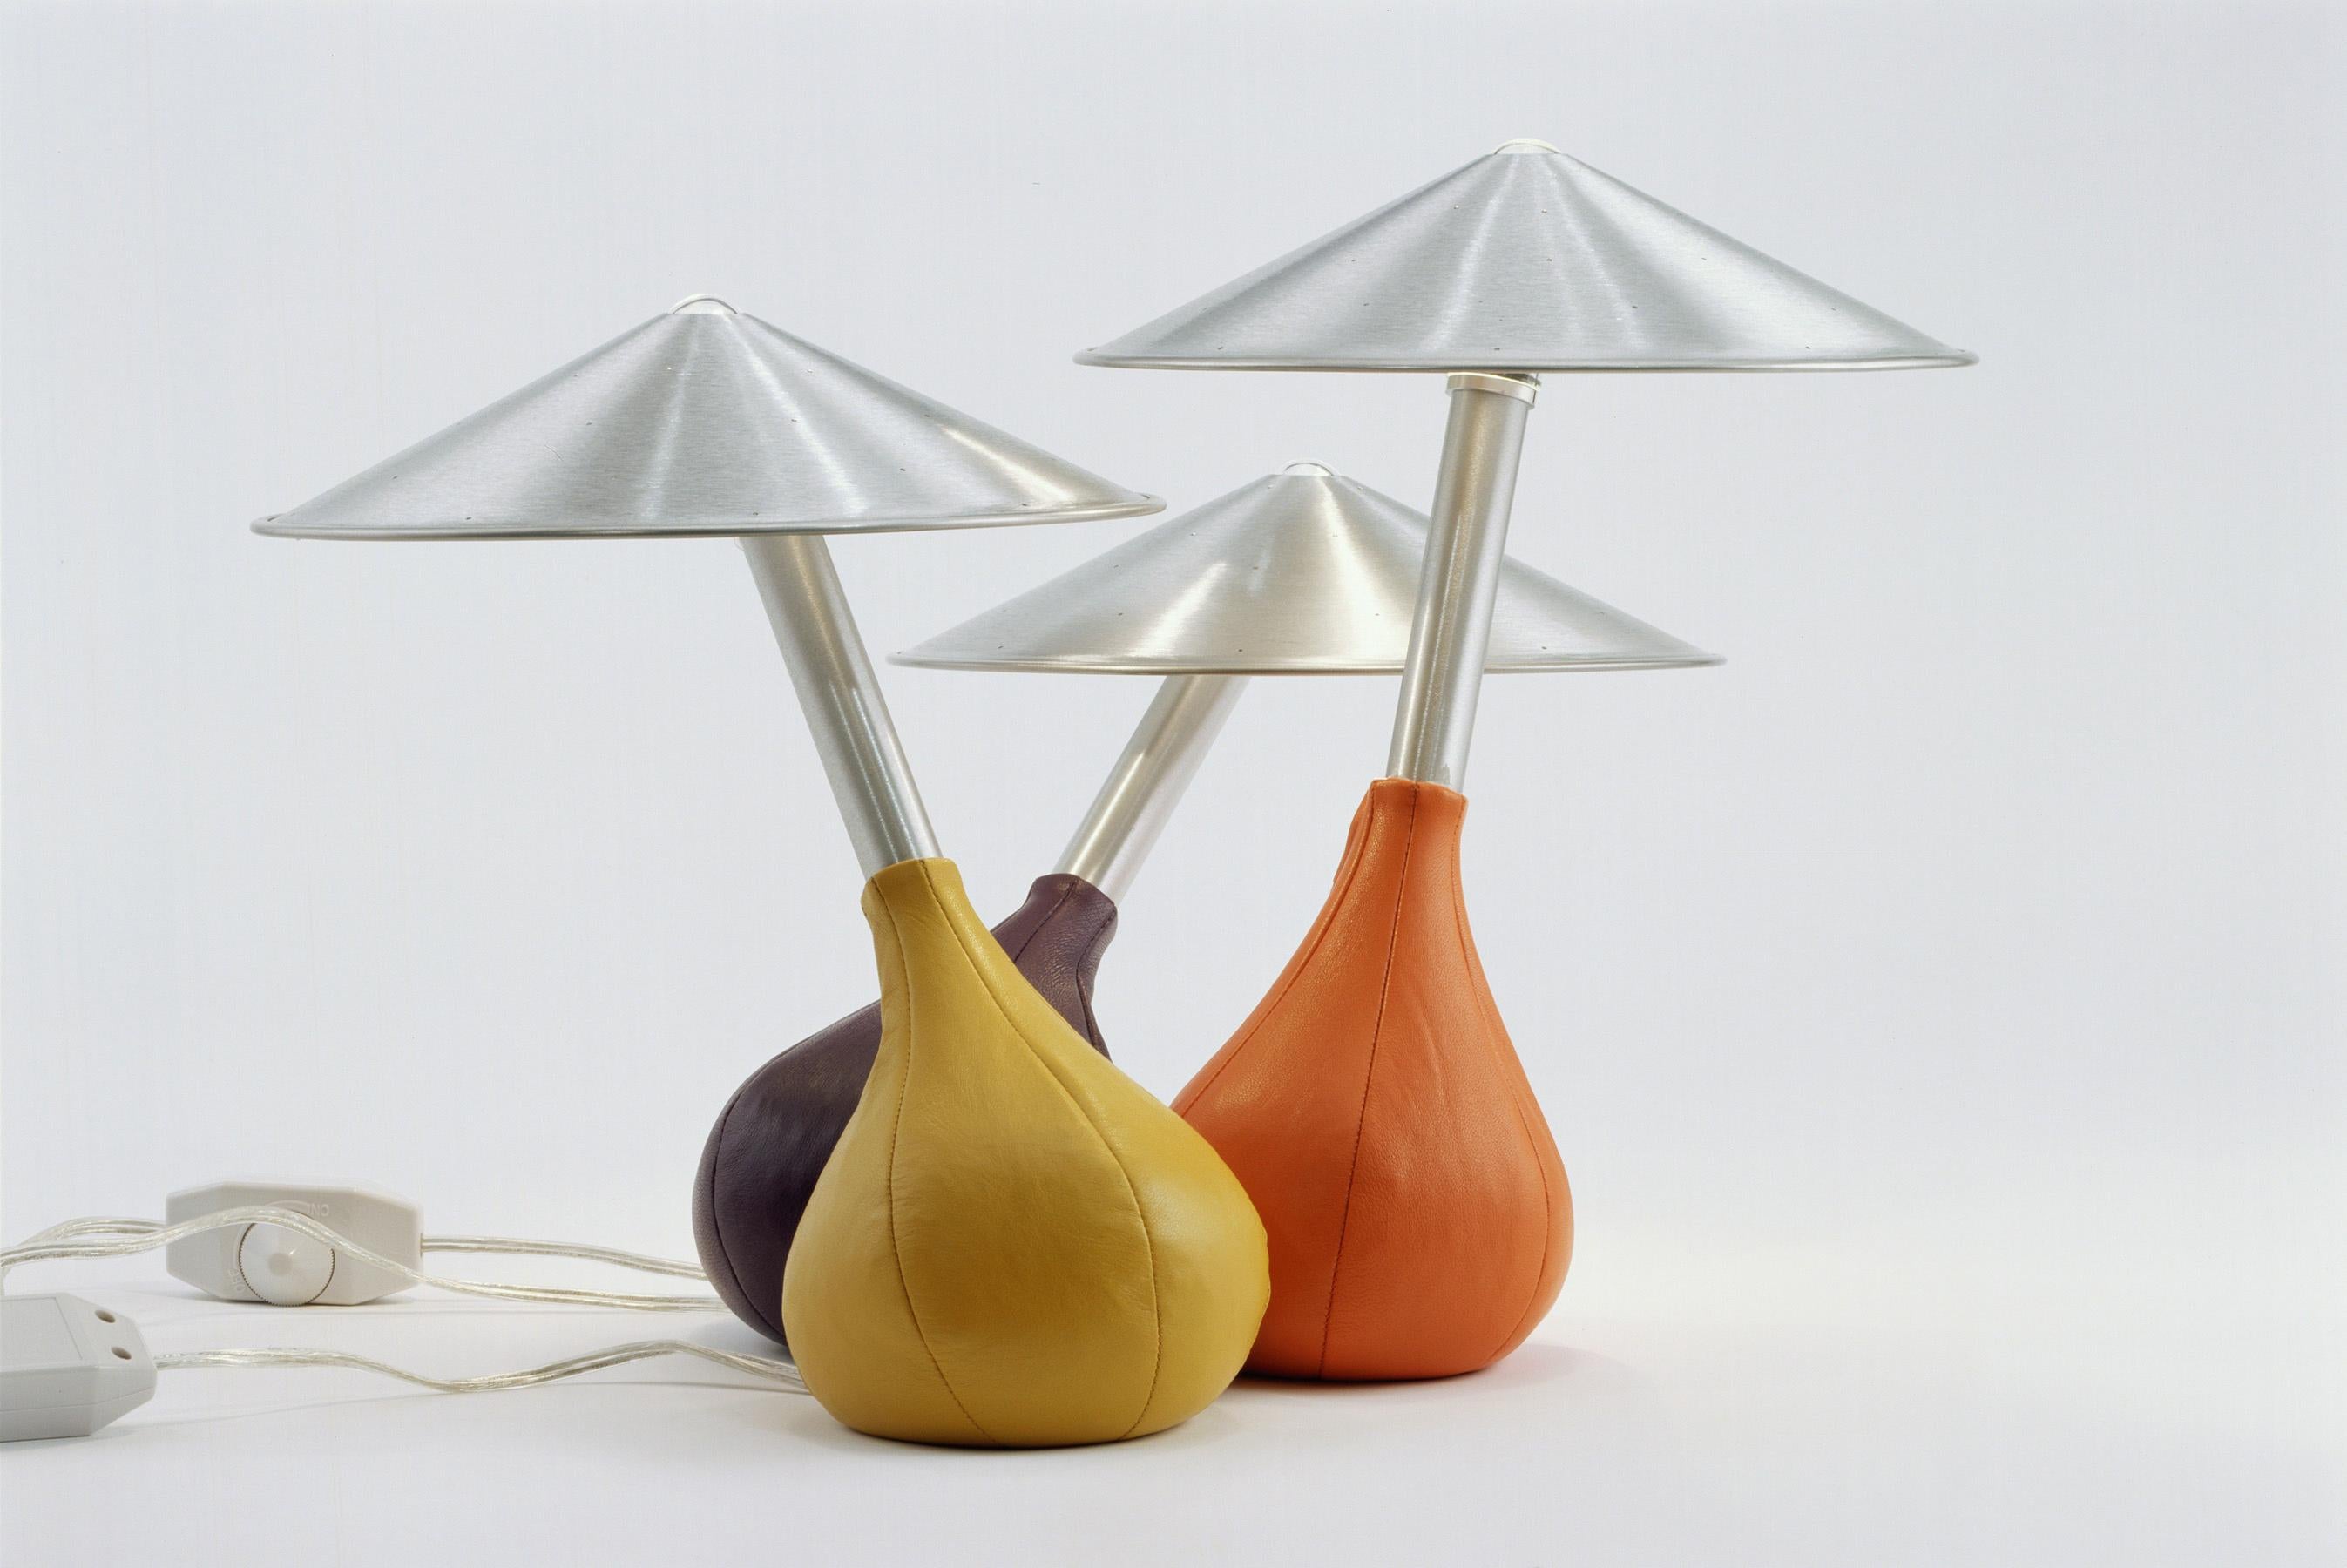 American Piccola Table Lamp in Tan by Pablo Designs